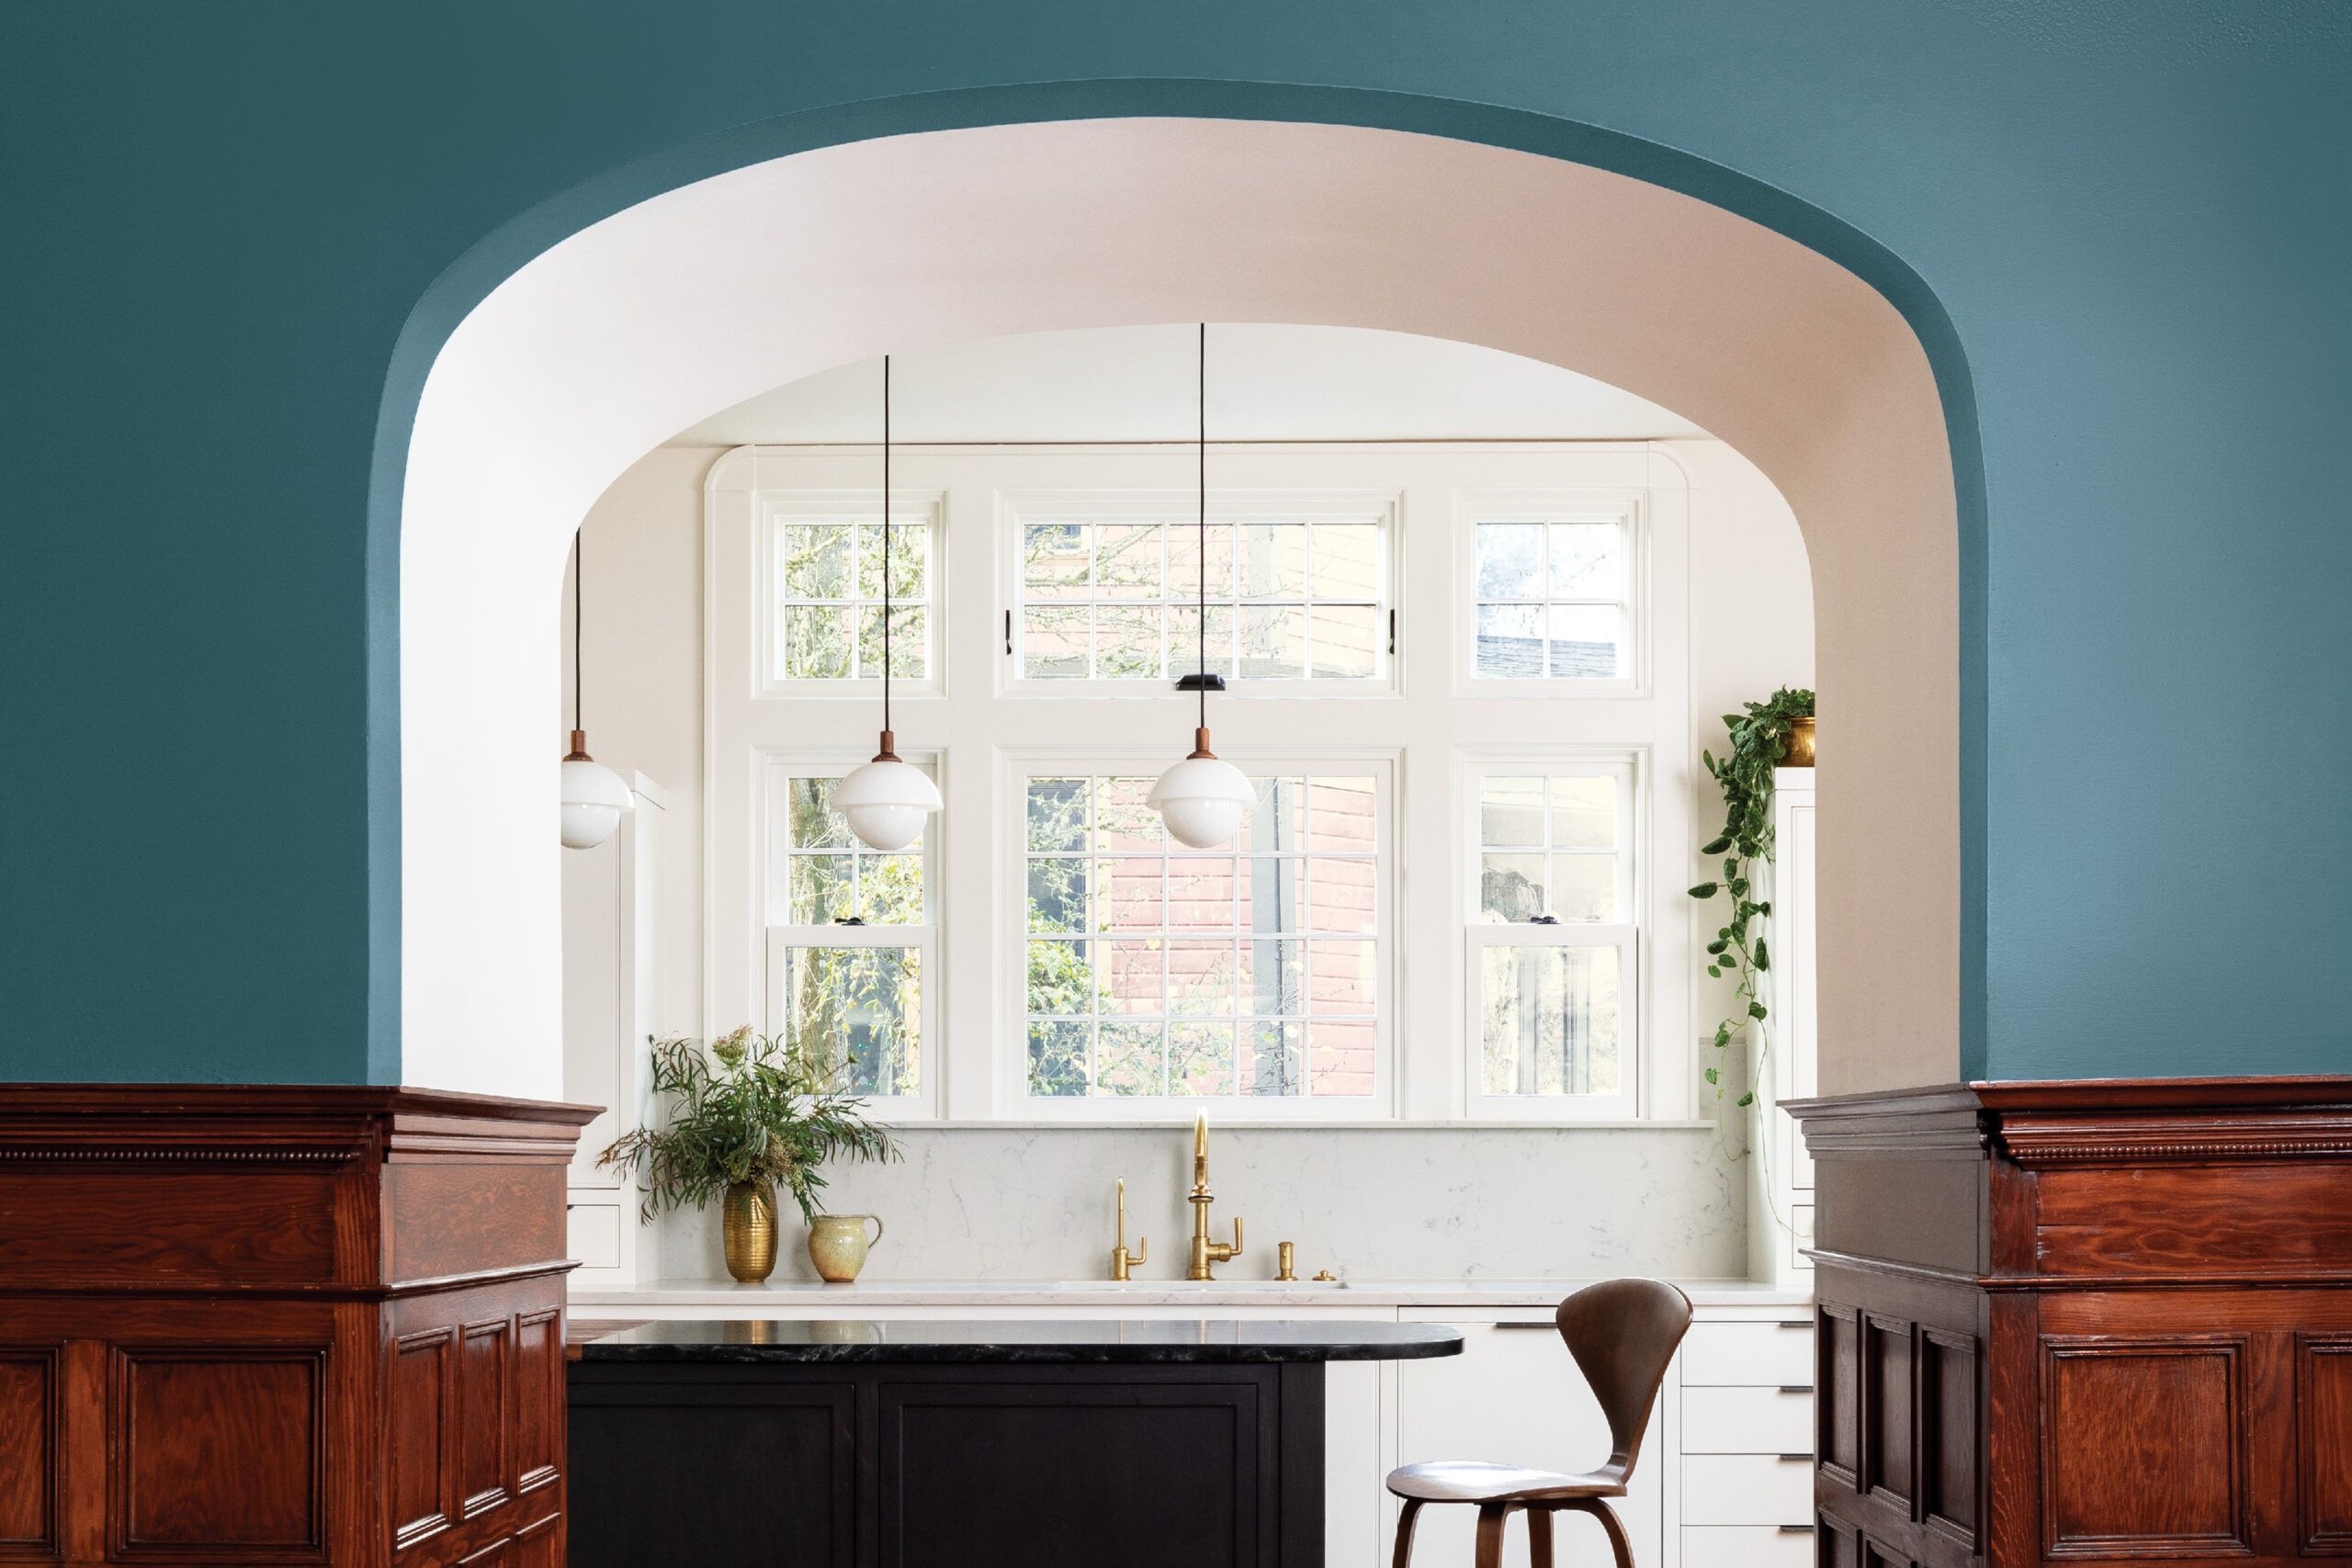 Arched hallway leading into a kitchen with a bold blue/green color